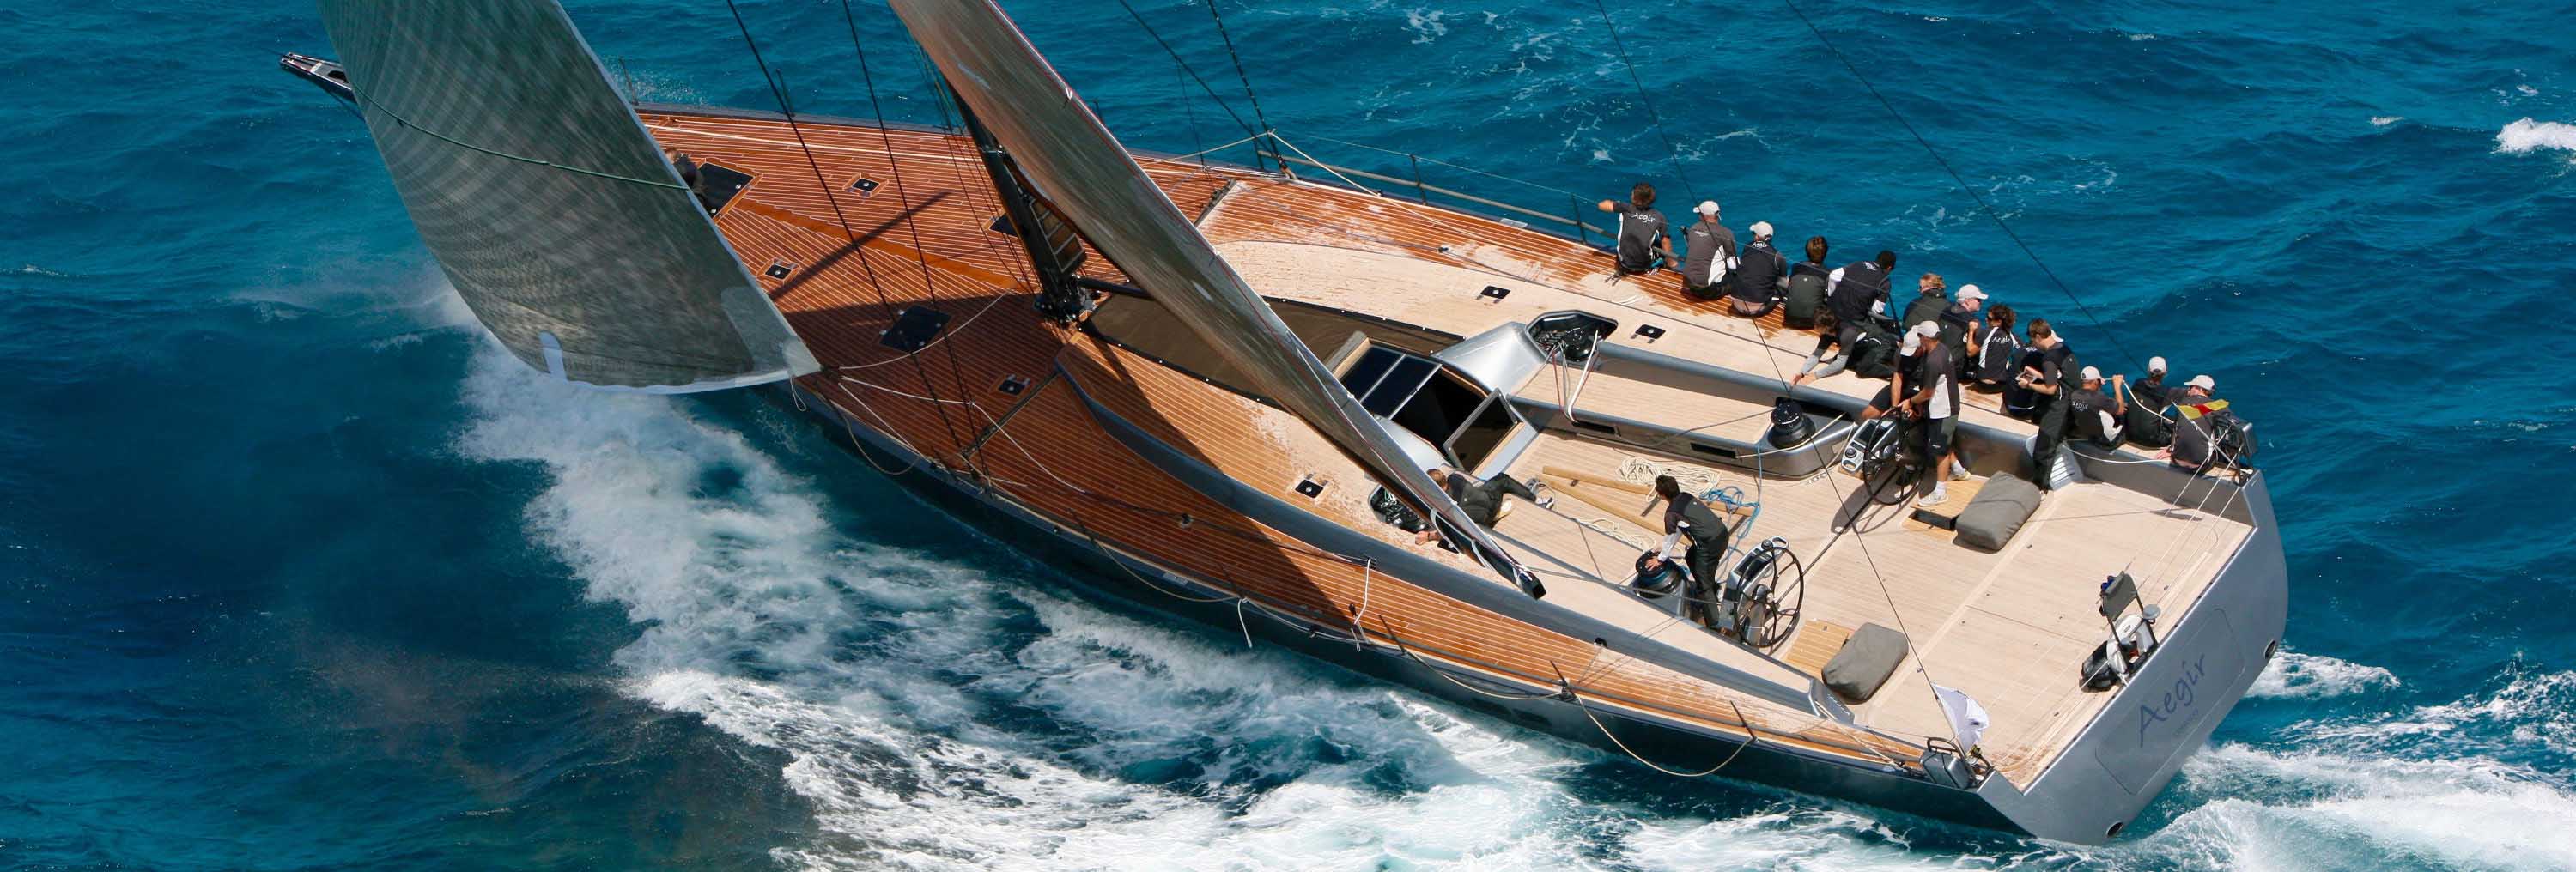 AEGIR : Available for Racing Charters